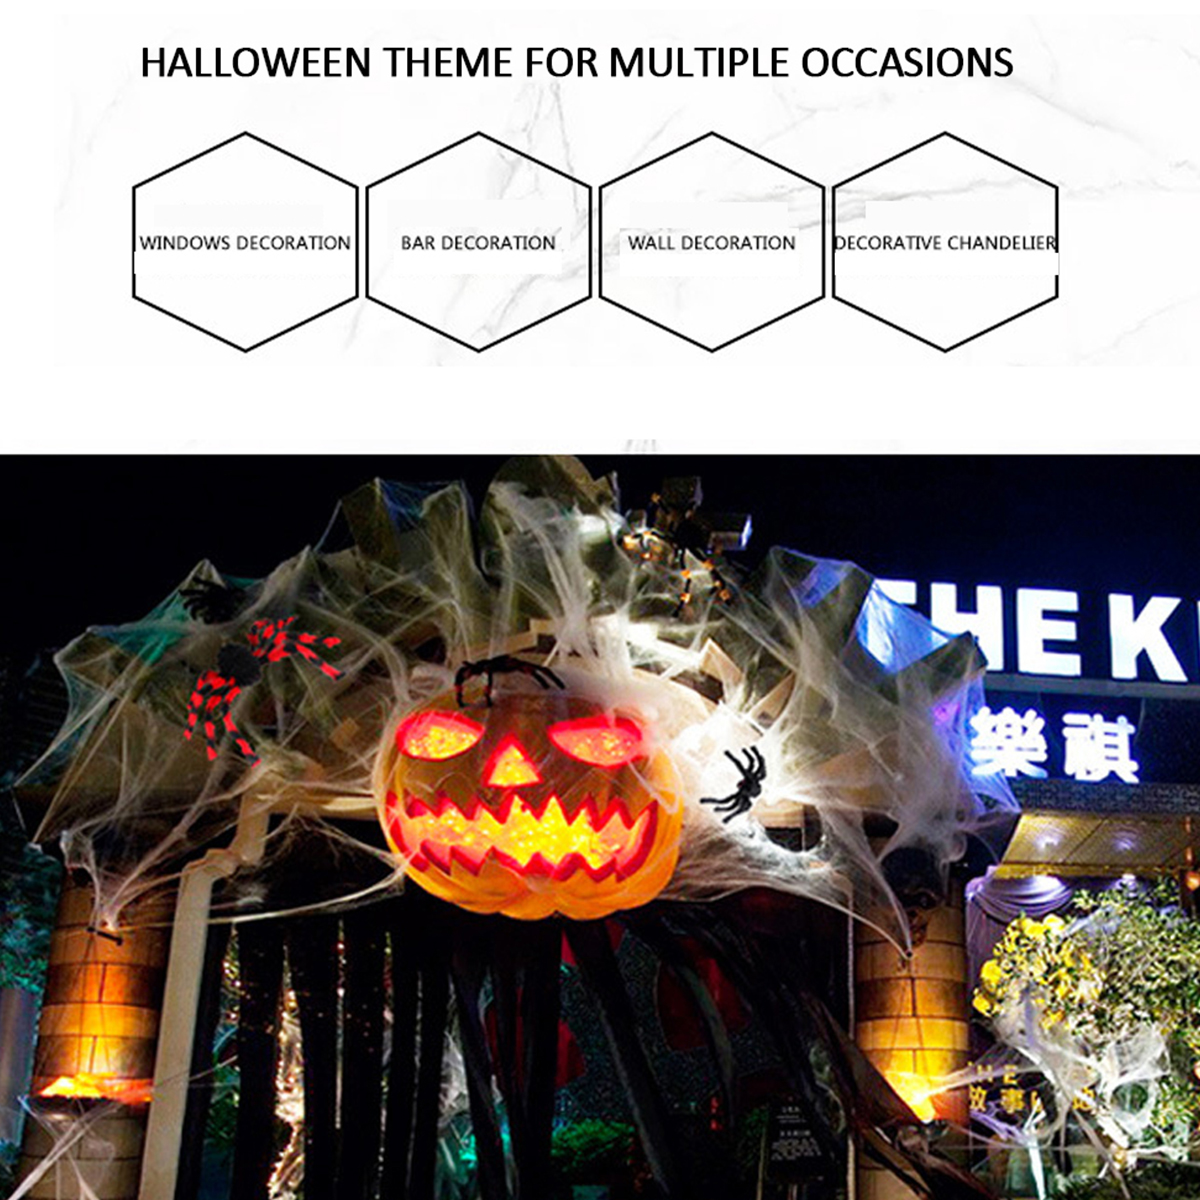 Halloween-Decor-Spider-Web-Party-Supplies-Scary-Horror-Prop-Outdoor-Indoor-Decoration-Hang-for-Bar-H-1753243-2